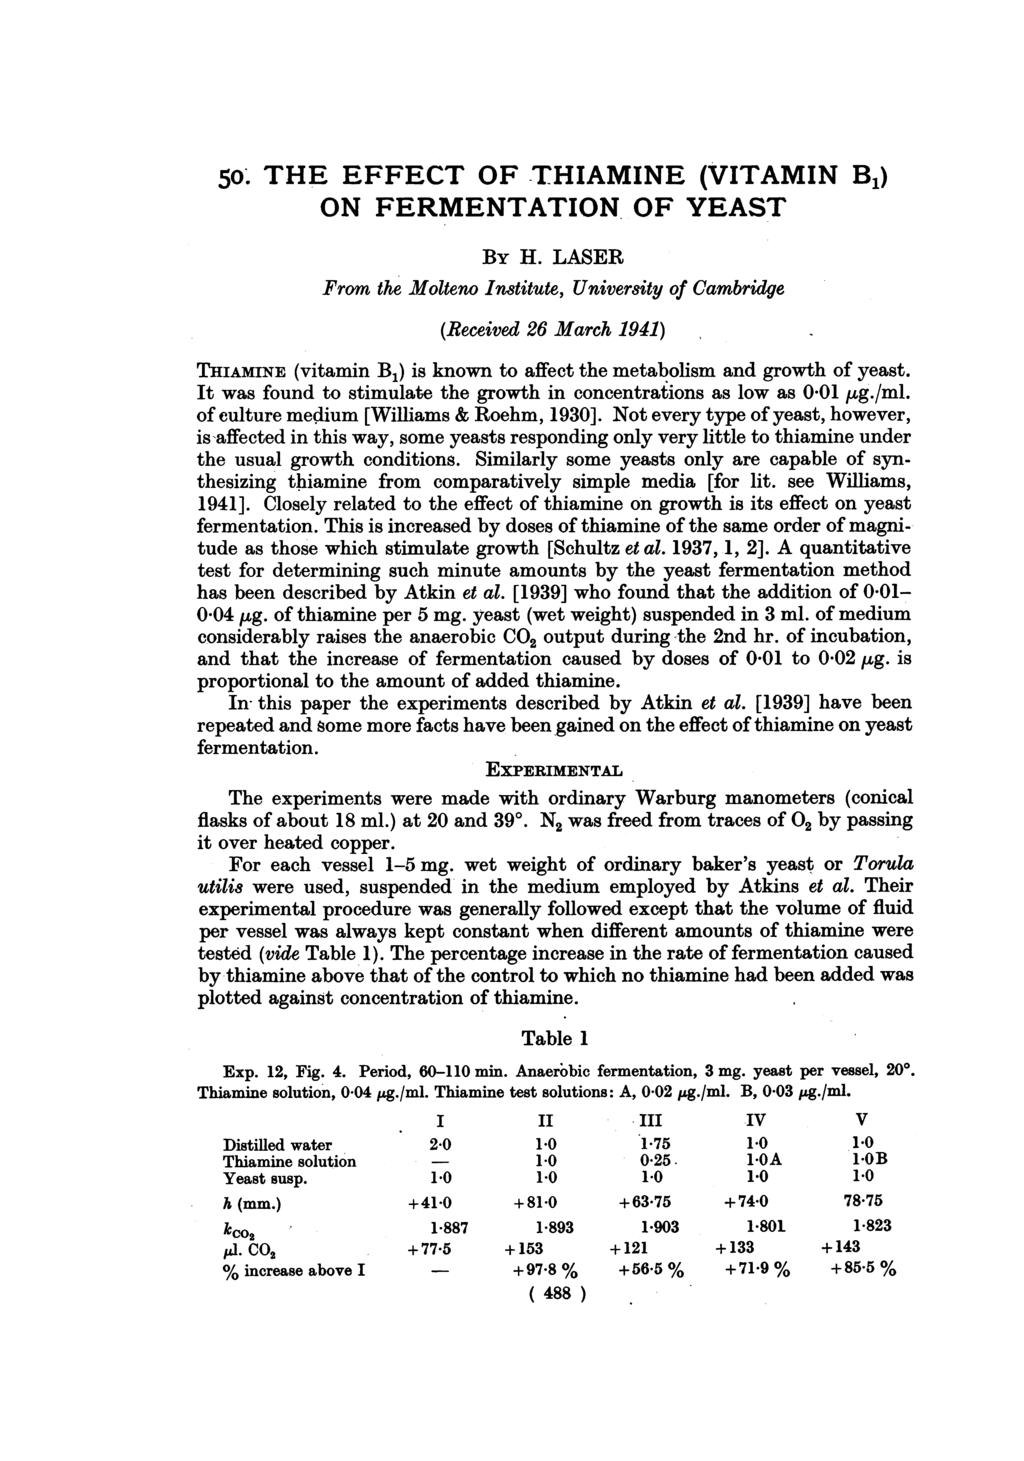 50 THE EFFECT OF -THIAMINE (VITAMIN B1) ON FERMENTATION OF YEAST BY H.